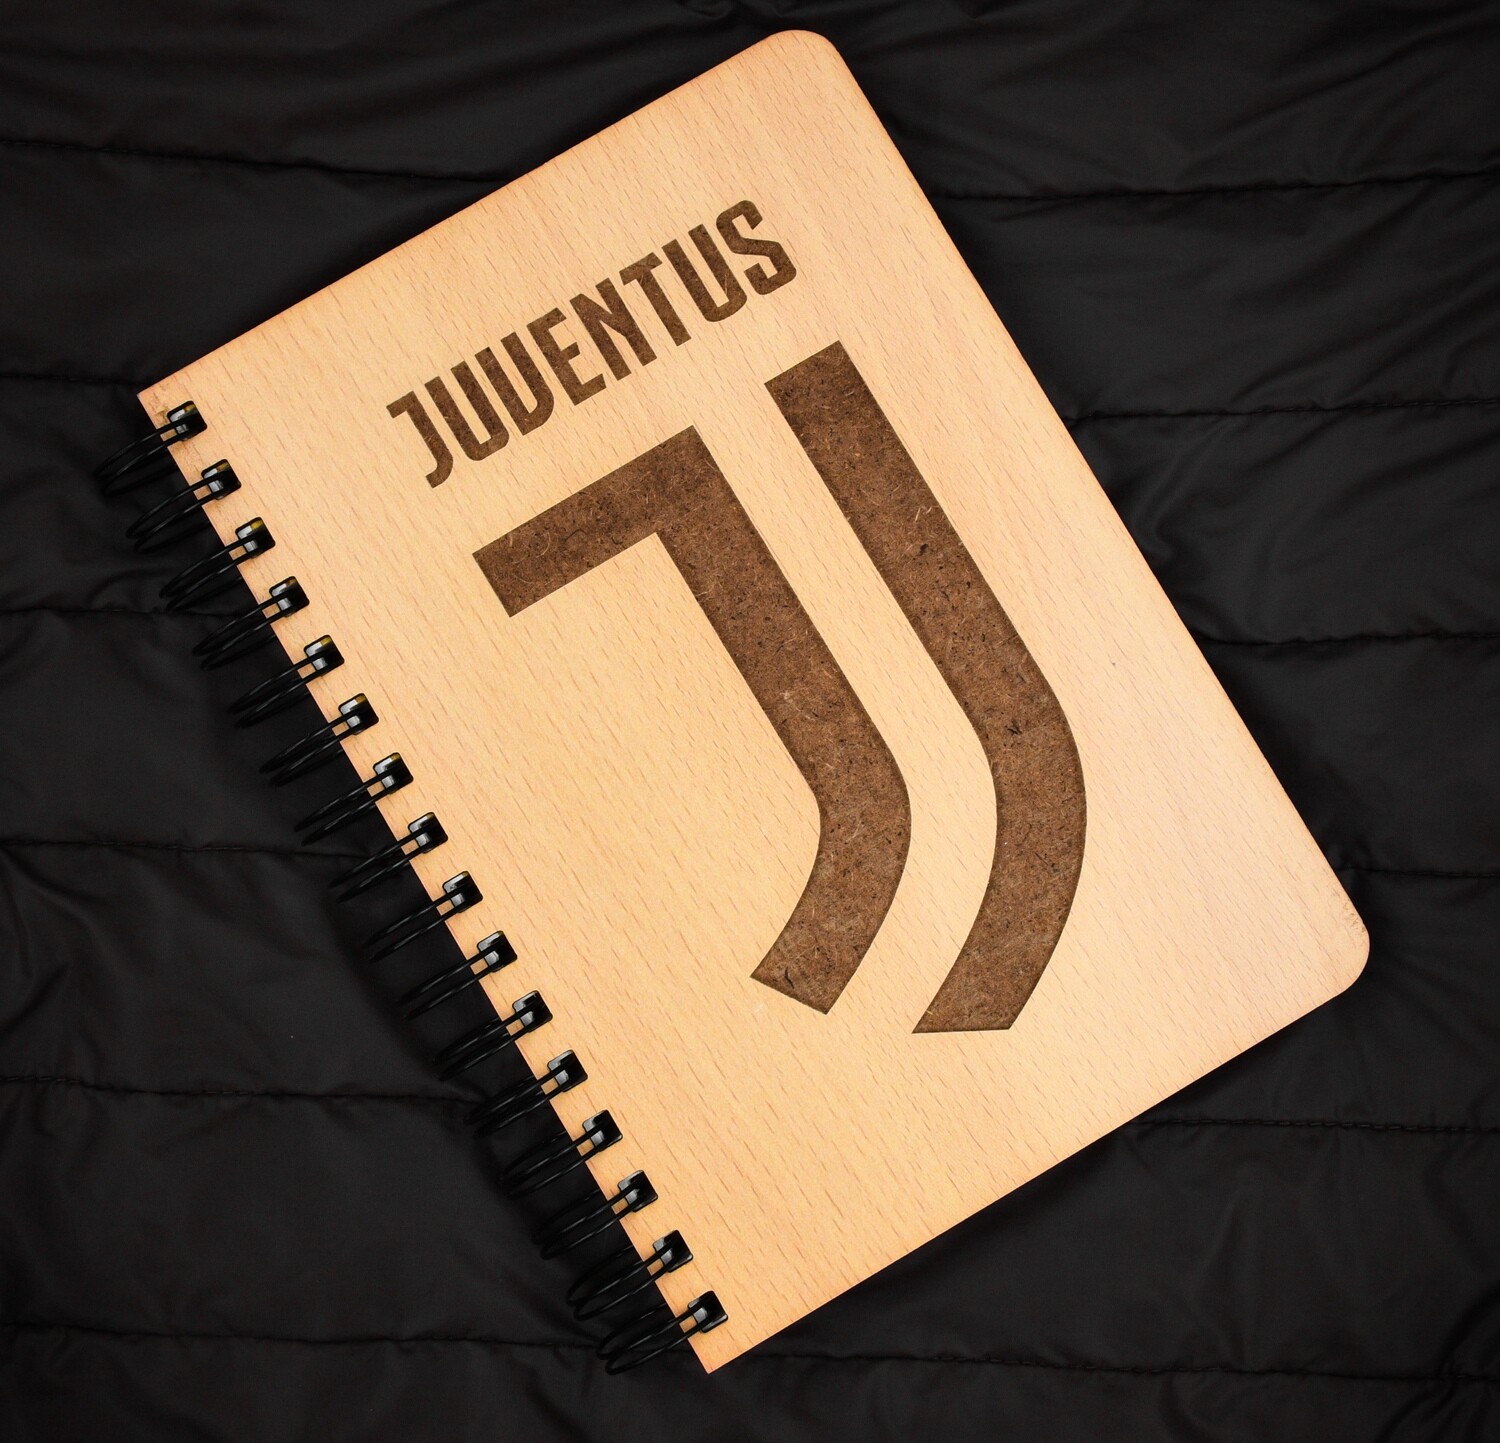 Juventus FC Diary Notebook with Engraved Wooden Cover